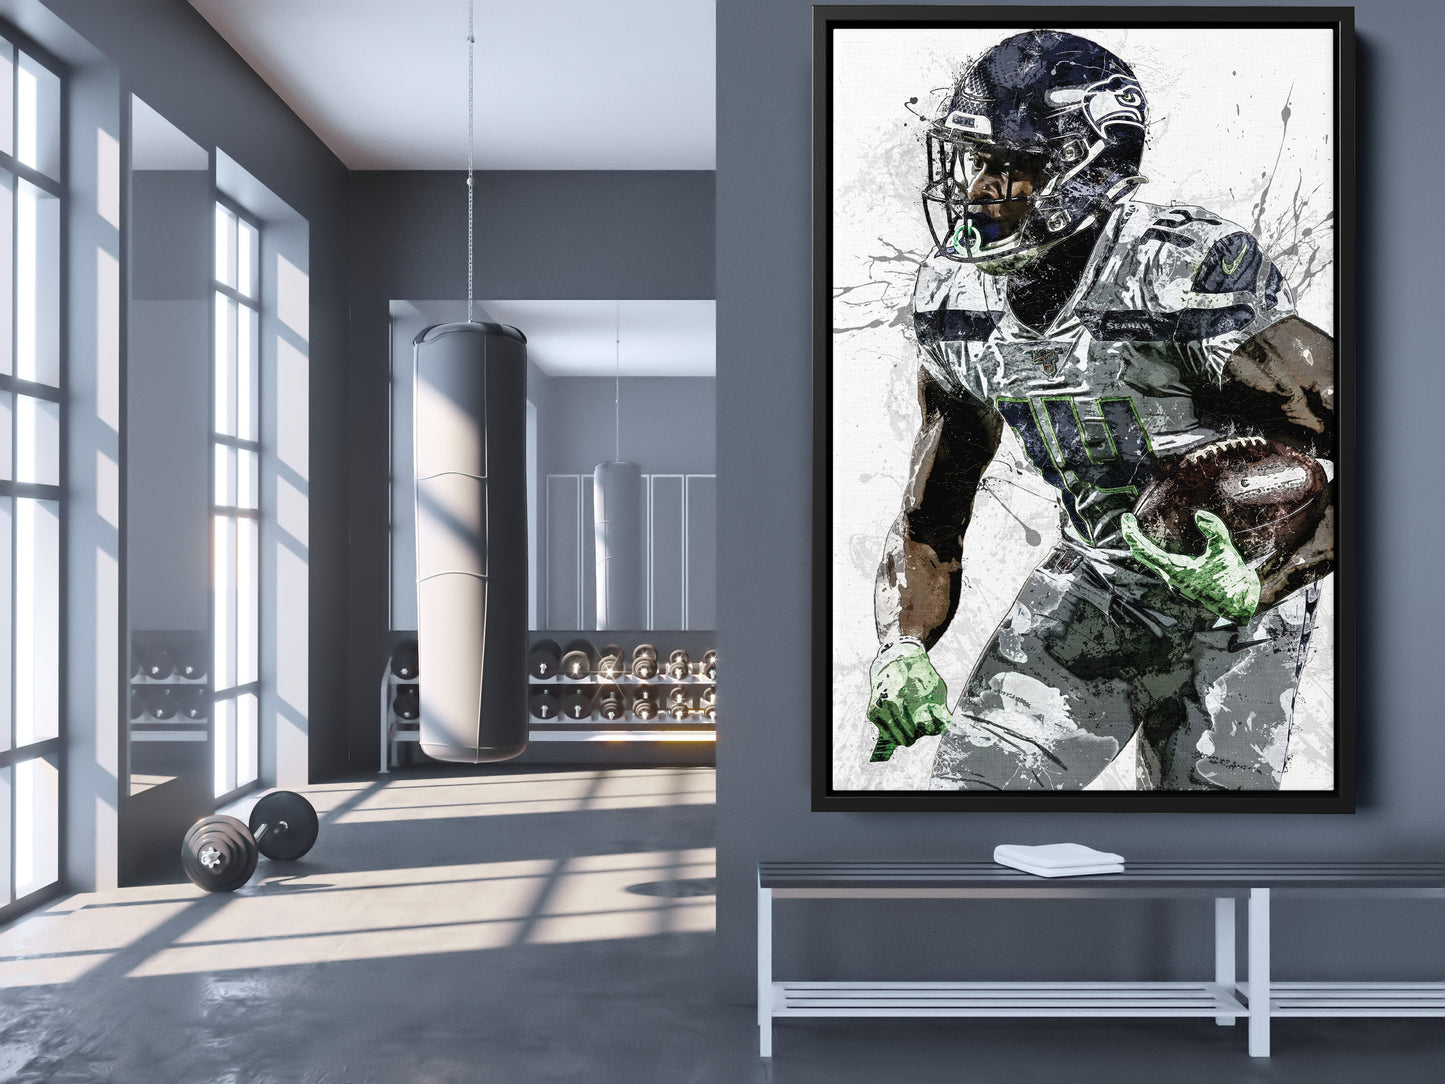 DK Metcalf Poster Seattle Seahawks Painting Football Hand Made Posters Canvas Print Kids Wall Art Home Man Cave Gift Decor